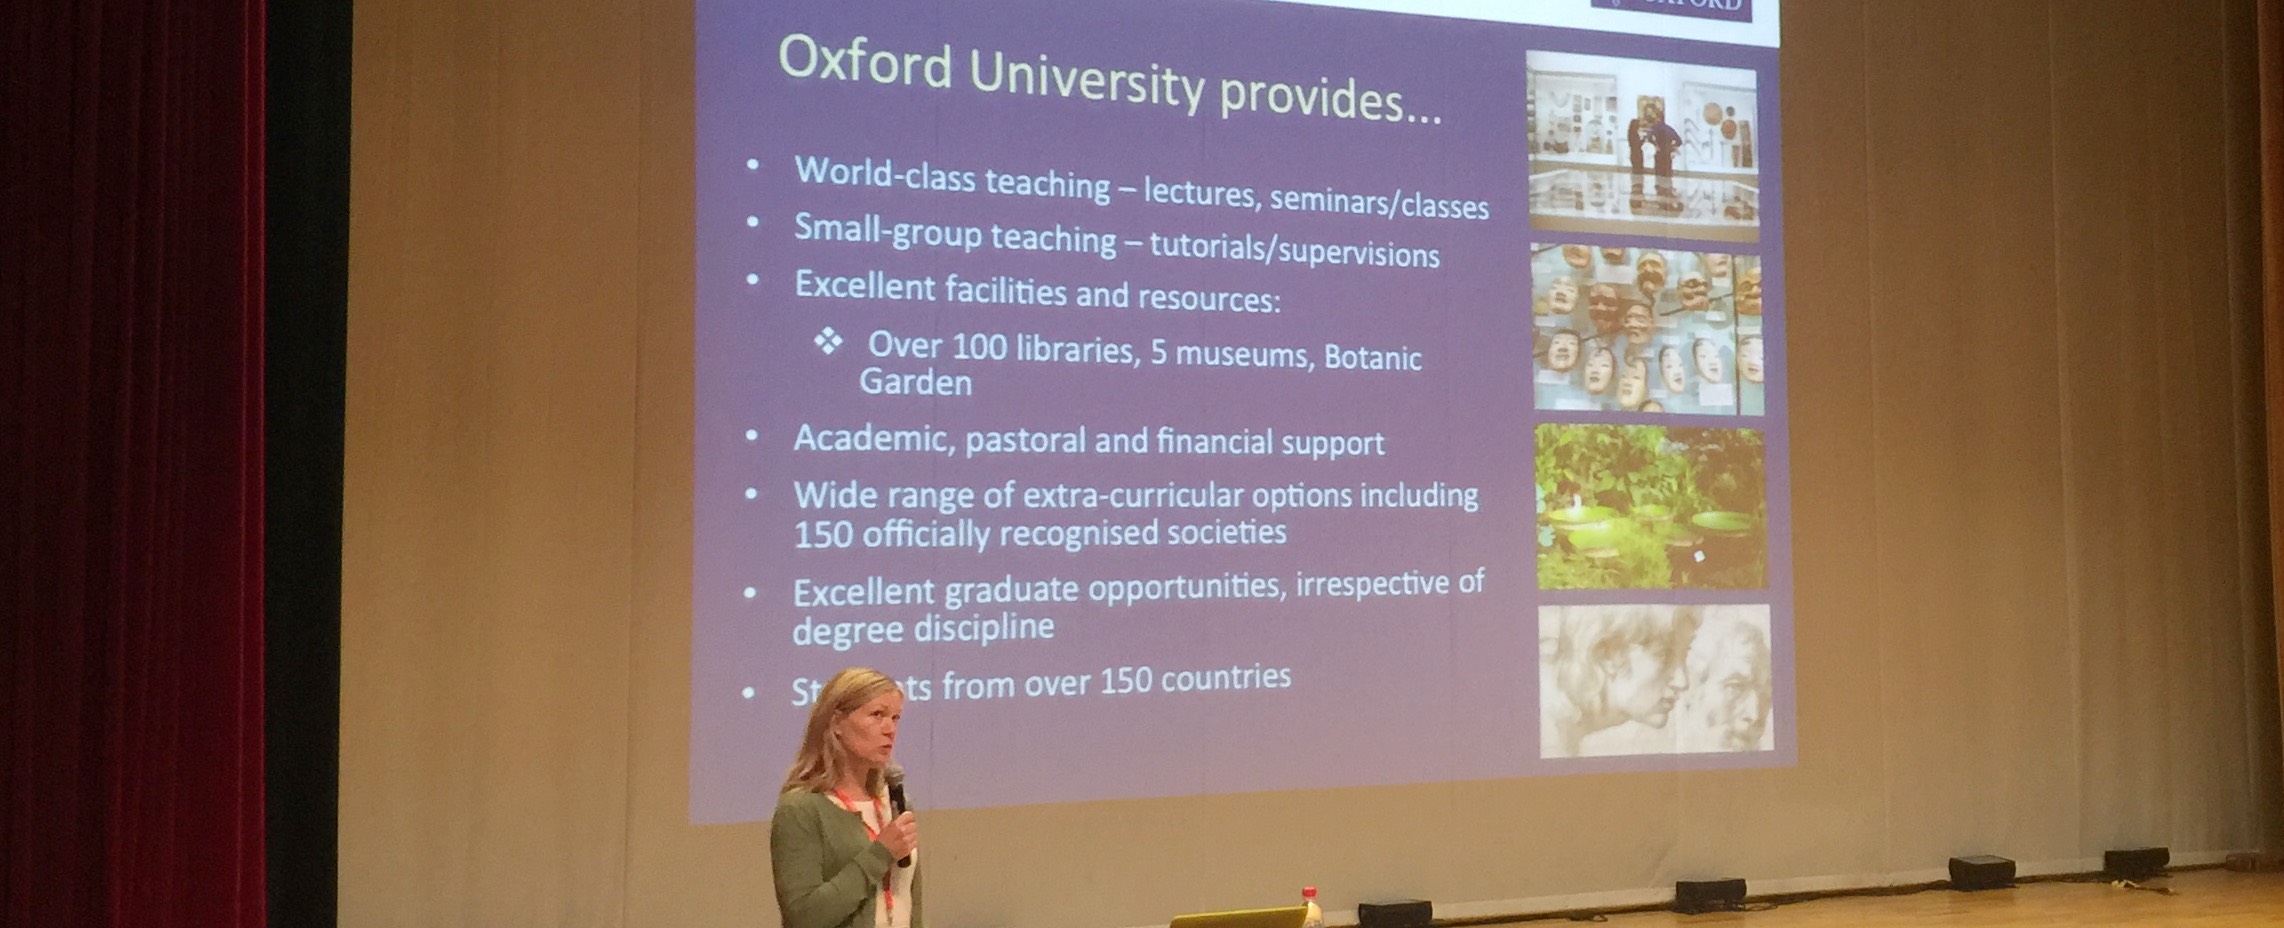 Ms Hamilton, Undergraduate Student Recruitment Officer East-Asia for University of Oxford, presents at Dulwich Suzhou